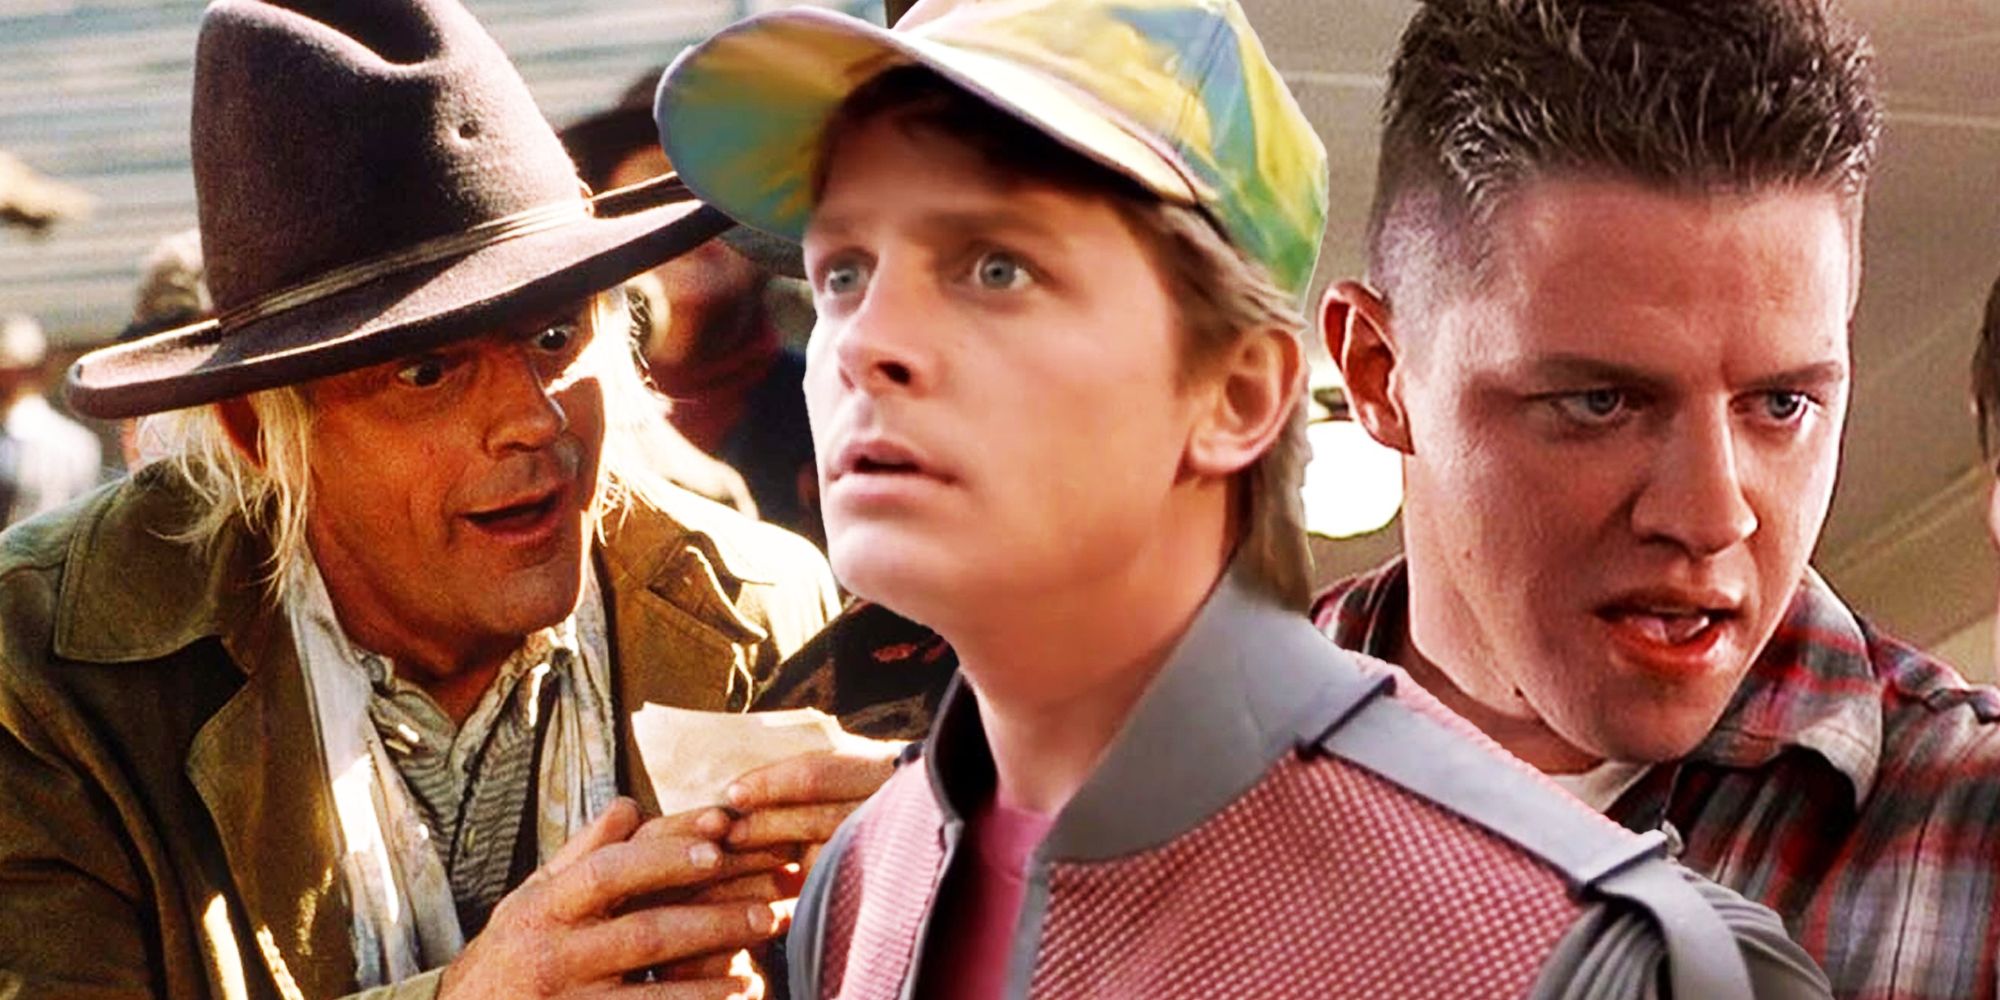 Marty McFly, Doc Brown, and Biff Tannen